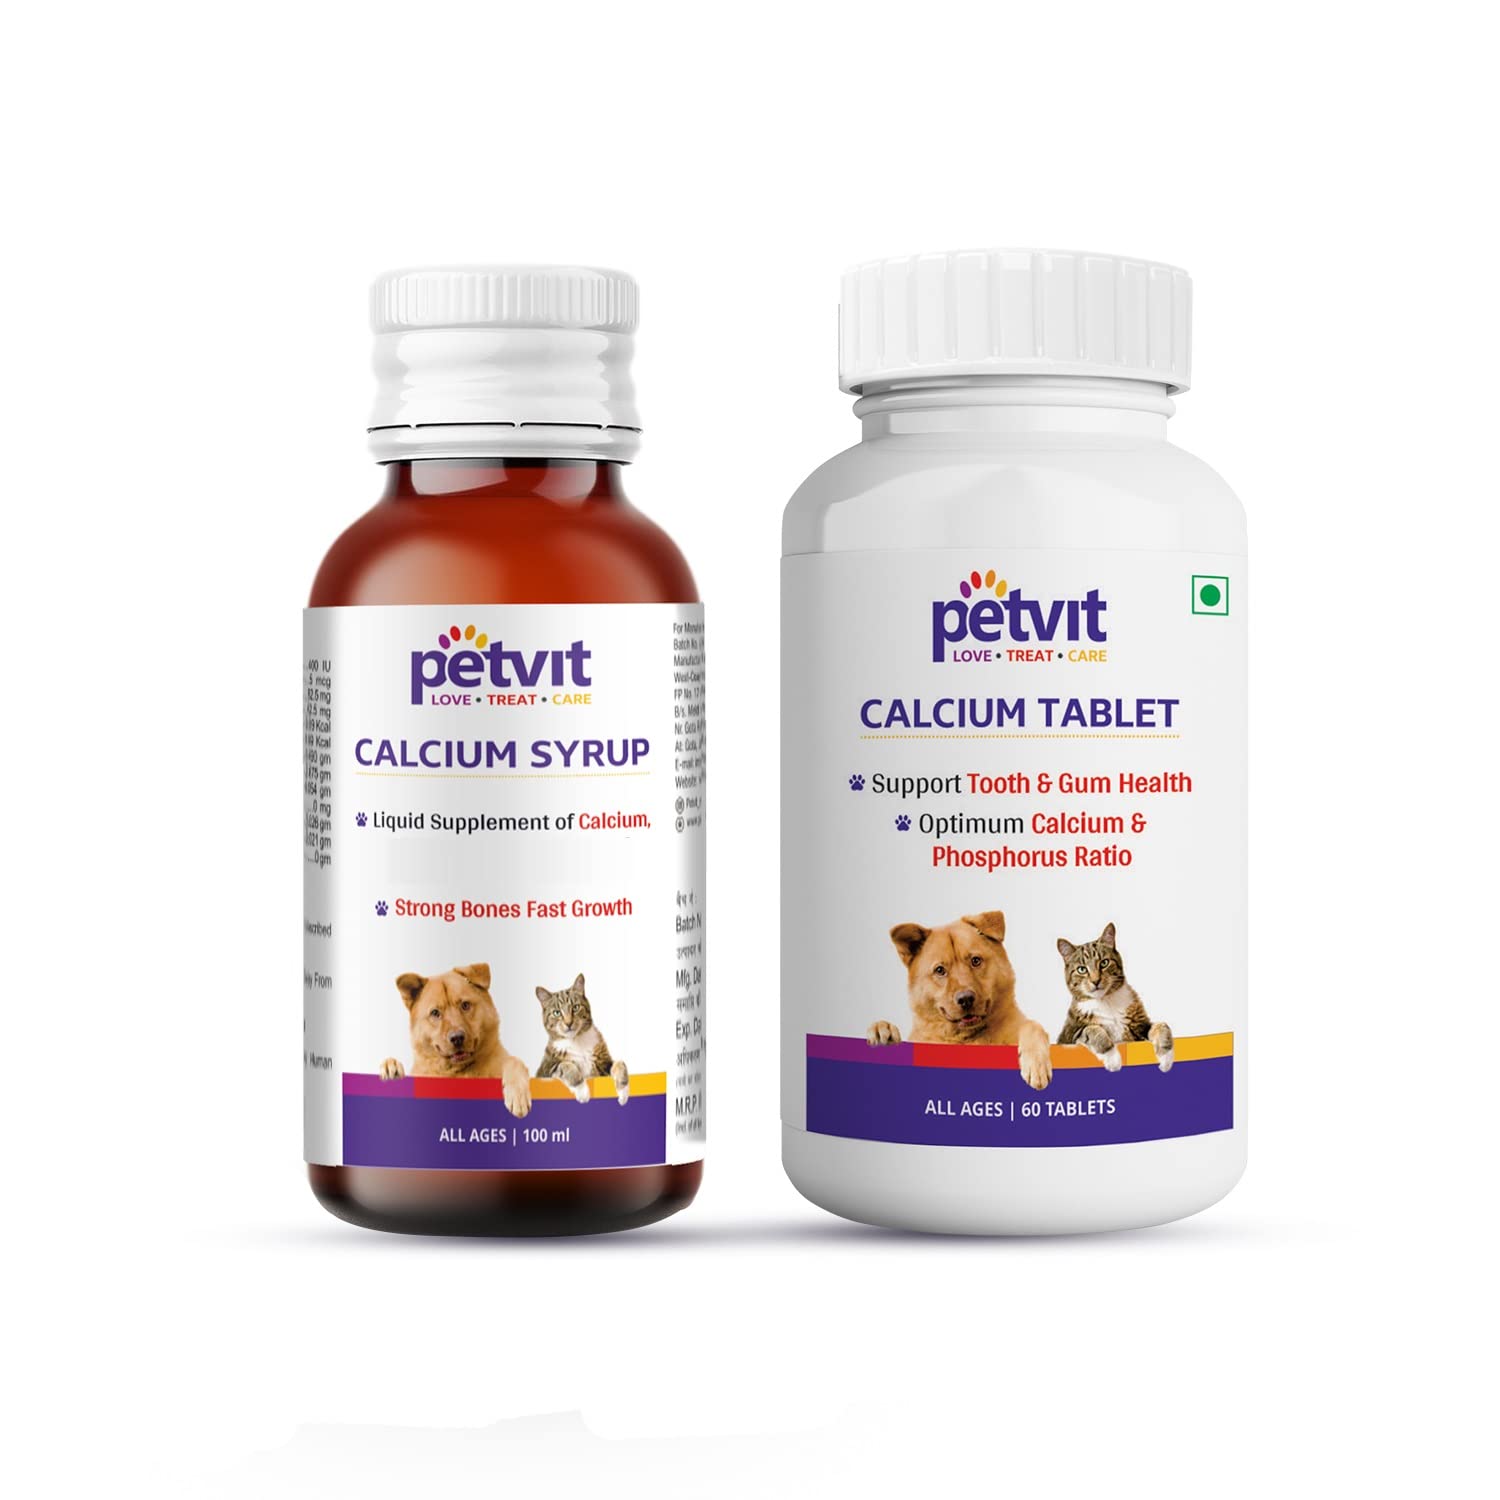 Petvit Calcium Syrup with Calcium, Phosphorus, Vitamin D3 & B12 – 100ml & Calcium Tablet with Calcium, Phosphorus, Vitamin D3 & Vitamin B12 for All Age Group – 60 Palatable Chewable Tablets (Combo)